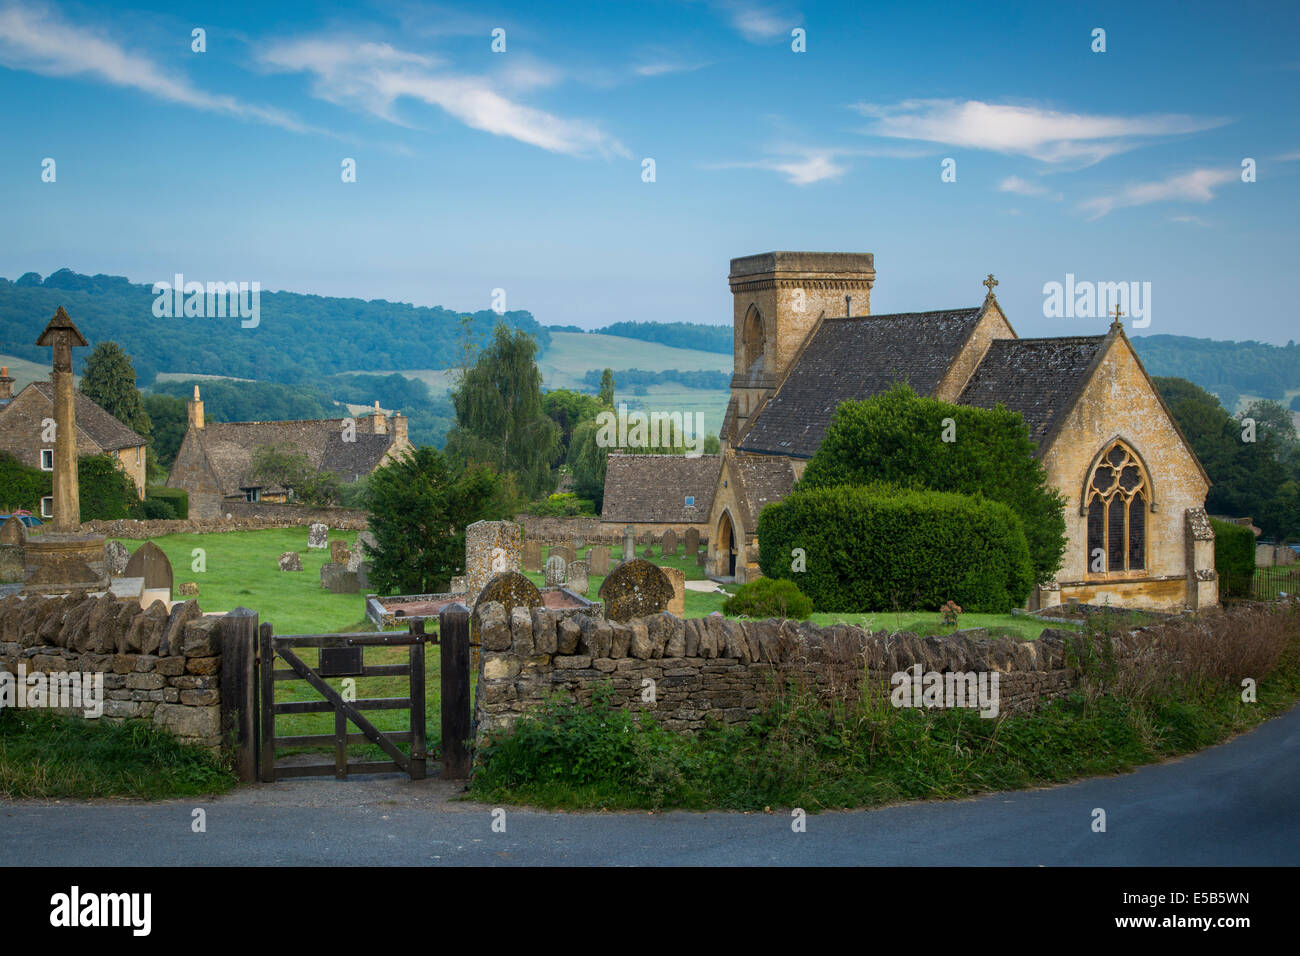 Early morning over the Cotswolds village of Snowshill, Gloucestershire, England Stock Photo